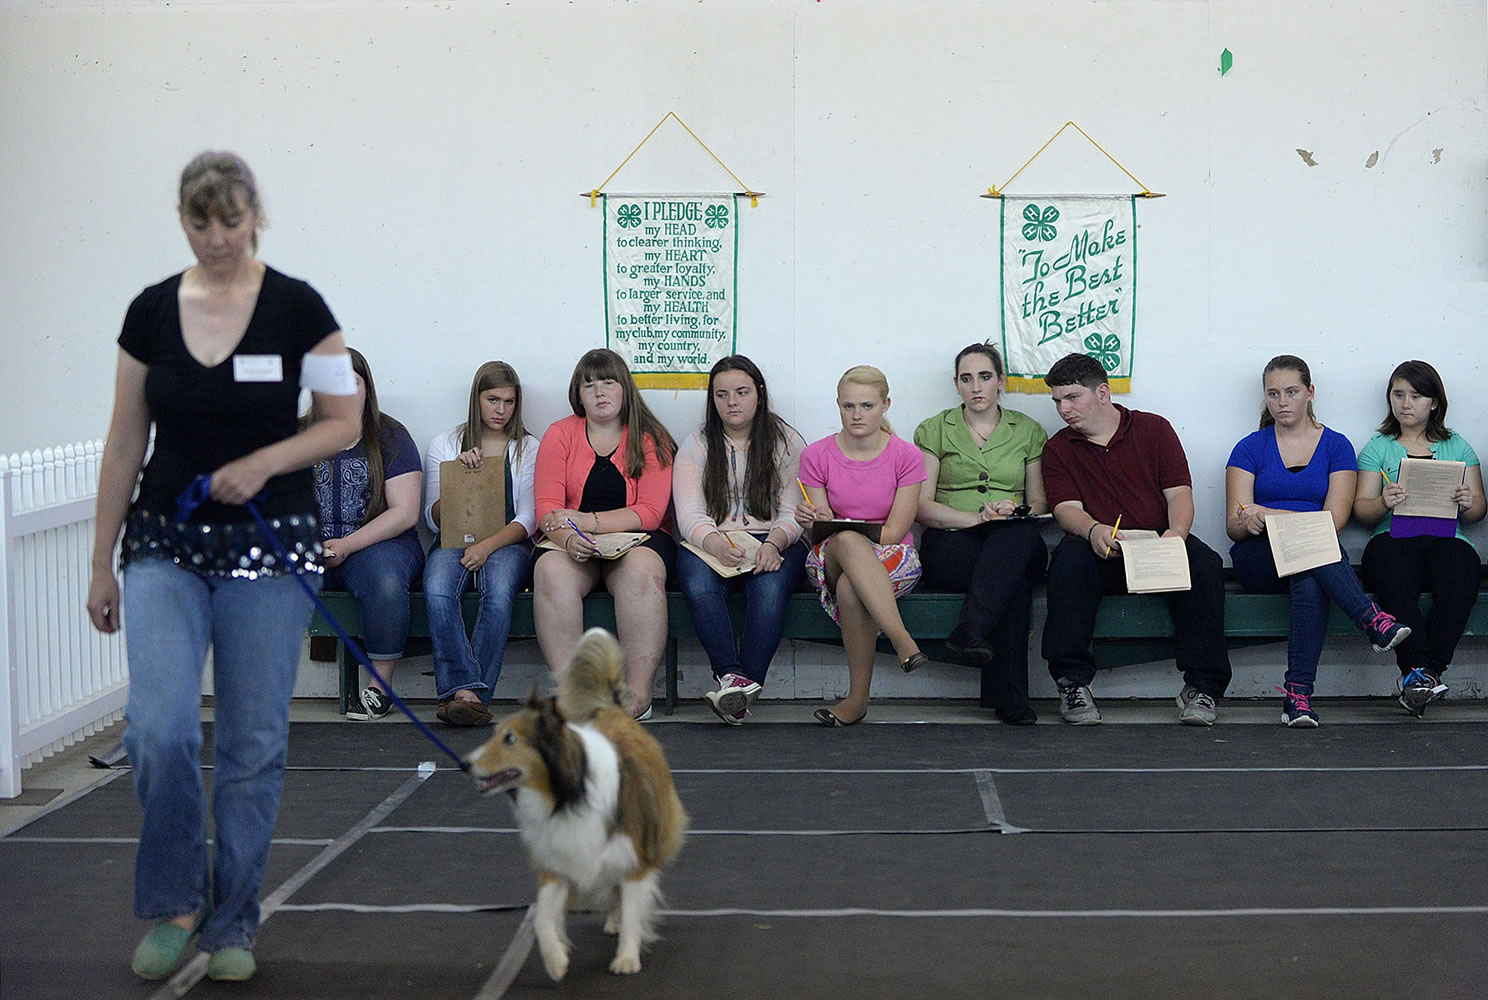 Photos by Amanda Cowan/The Columbian
Bobbe Whetsell, a 4-H volunteer, shows her dog, Maya, at the Clark County Fair on Monday. Whetsell was showing her Sheltie to help the 4-H participants hone their judging skills.